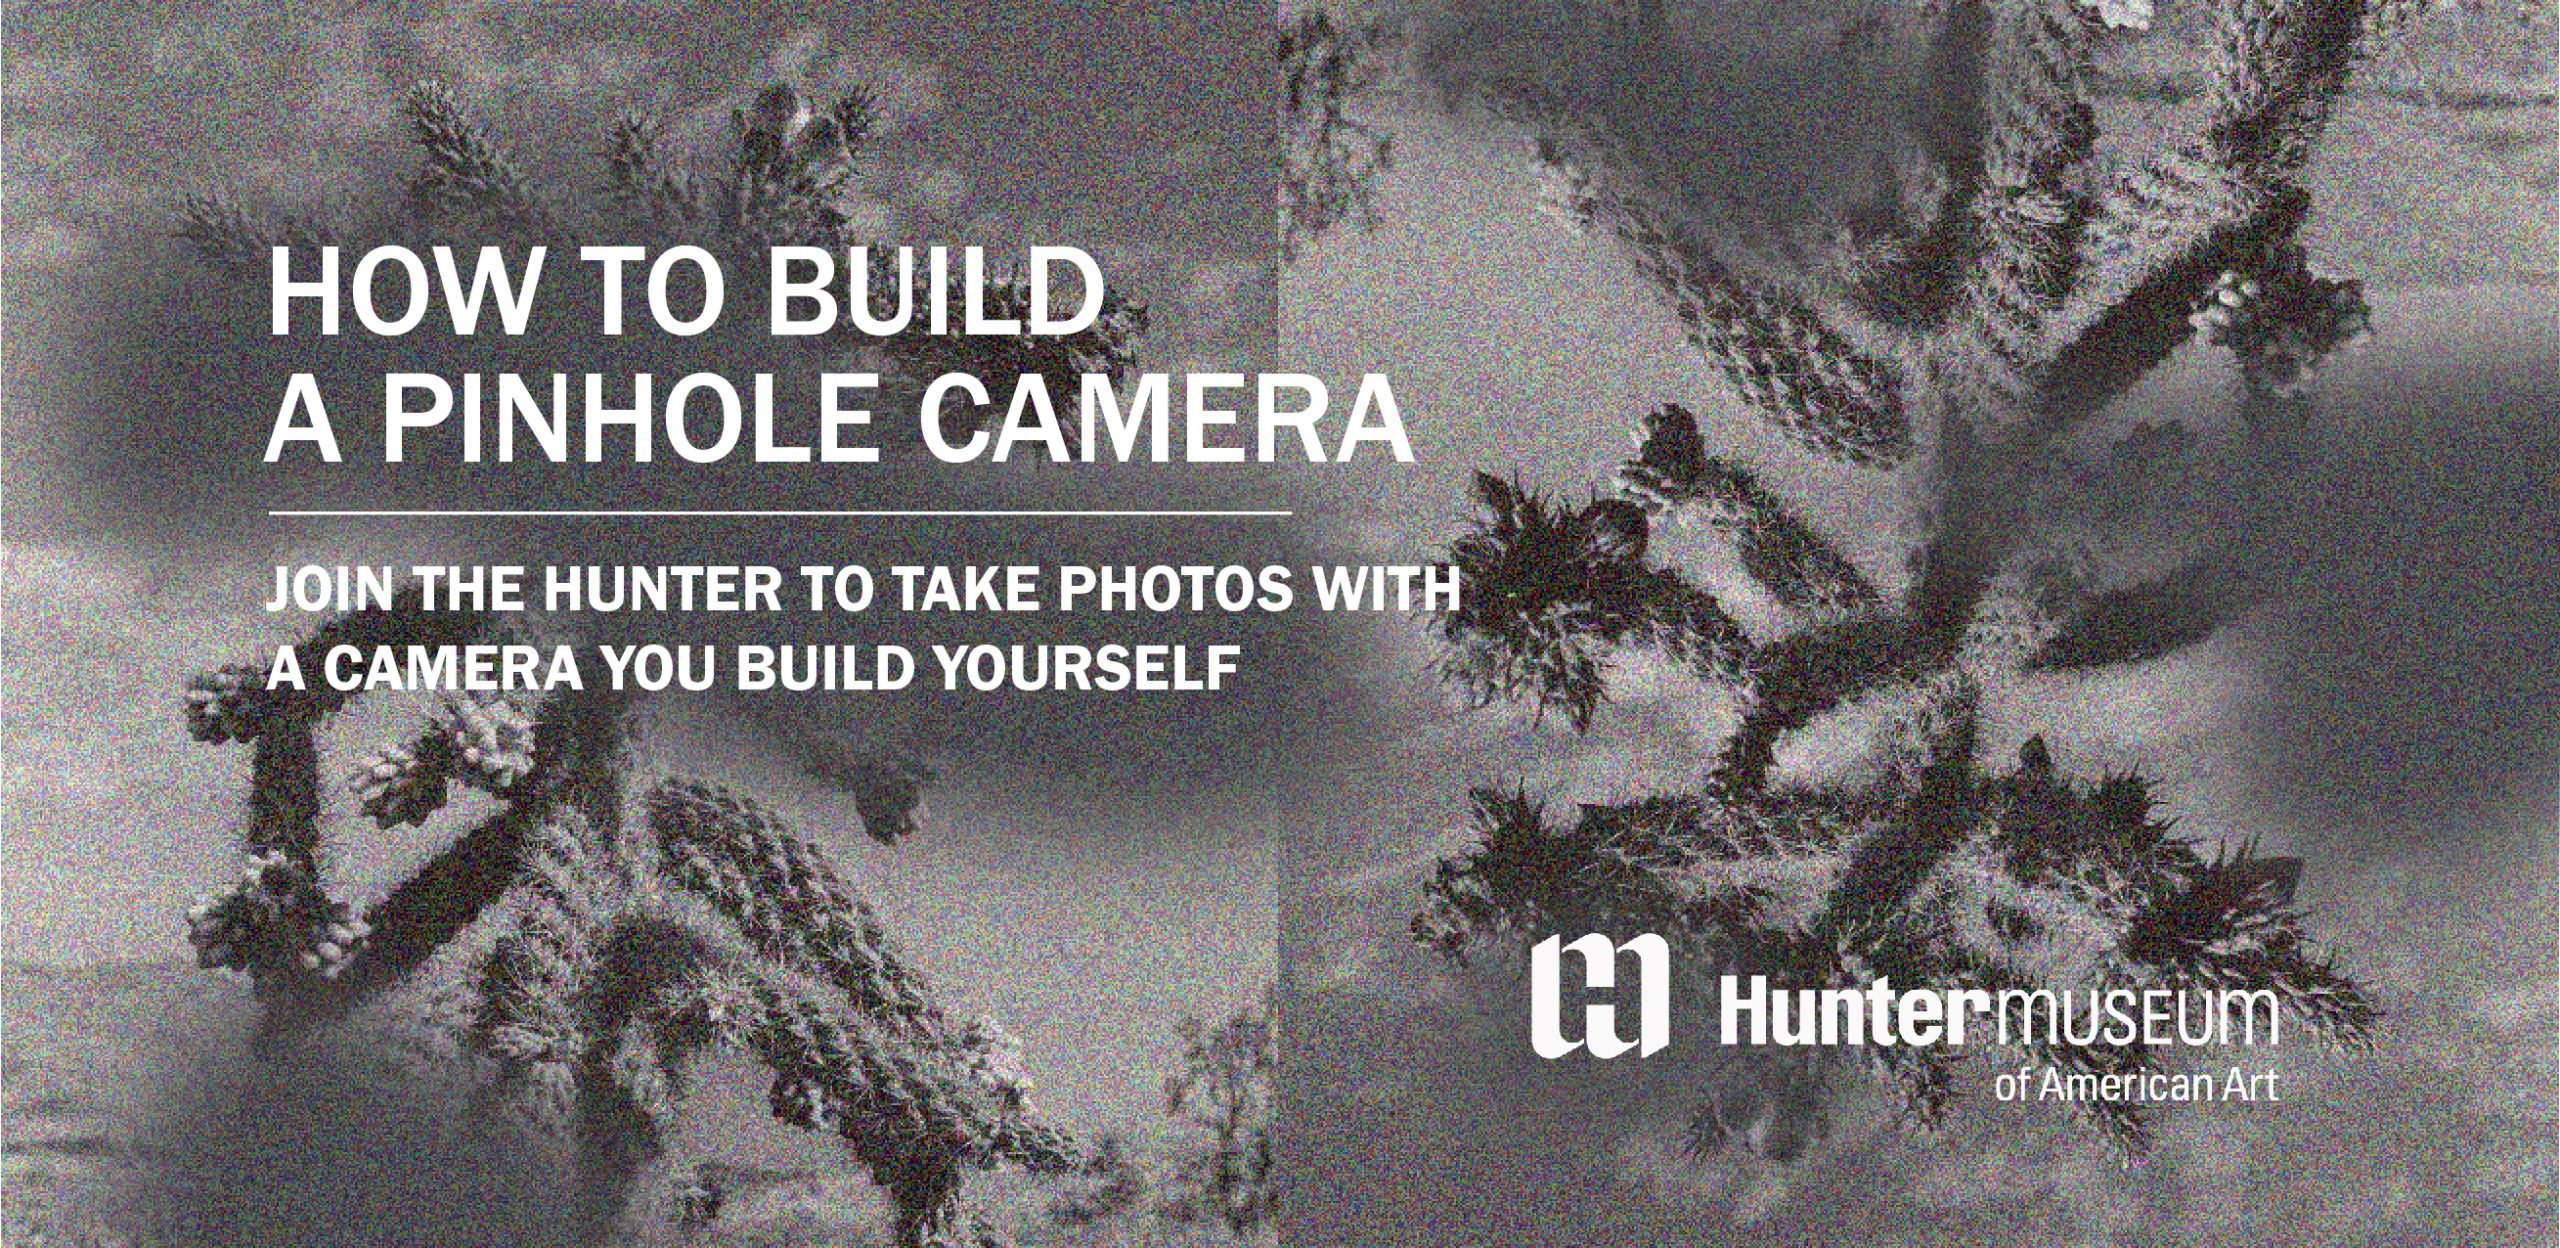 Text reads "Join the Hunter to take photos with a camera you build yourself."